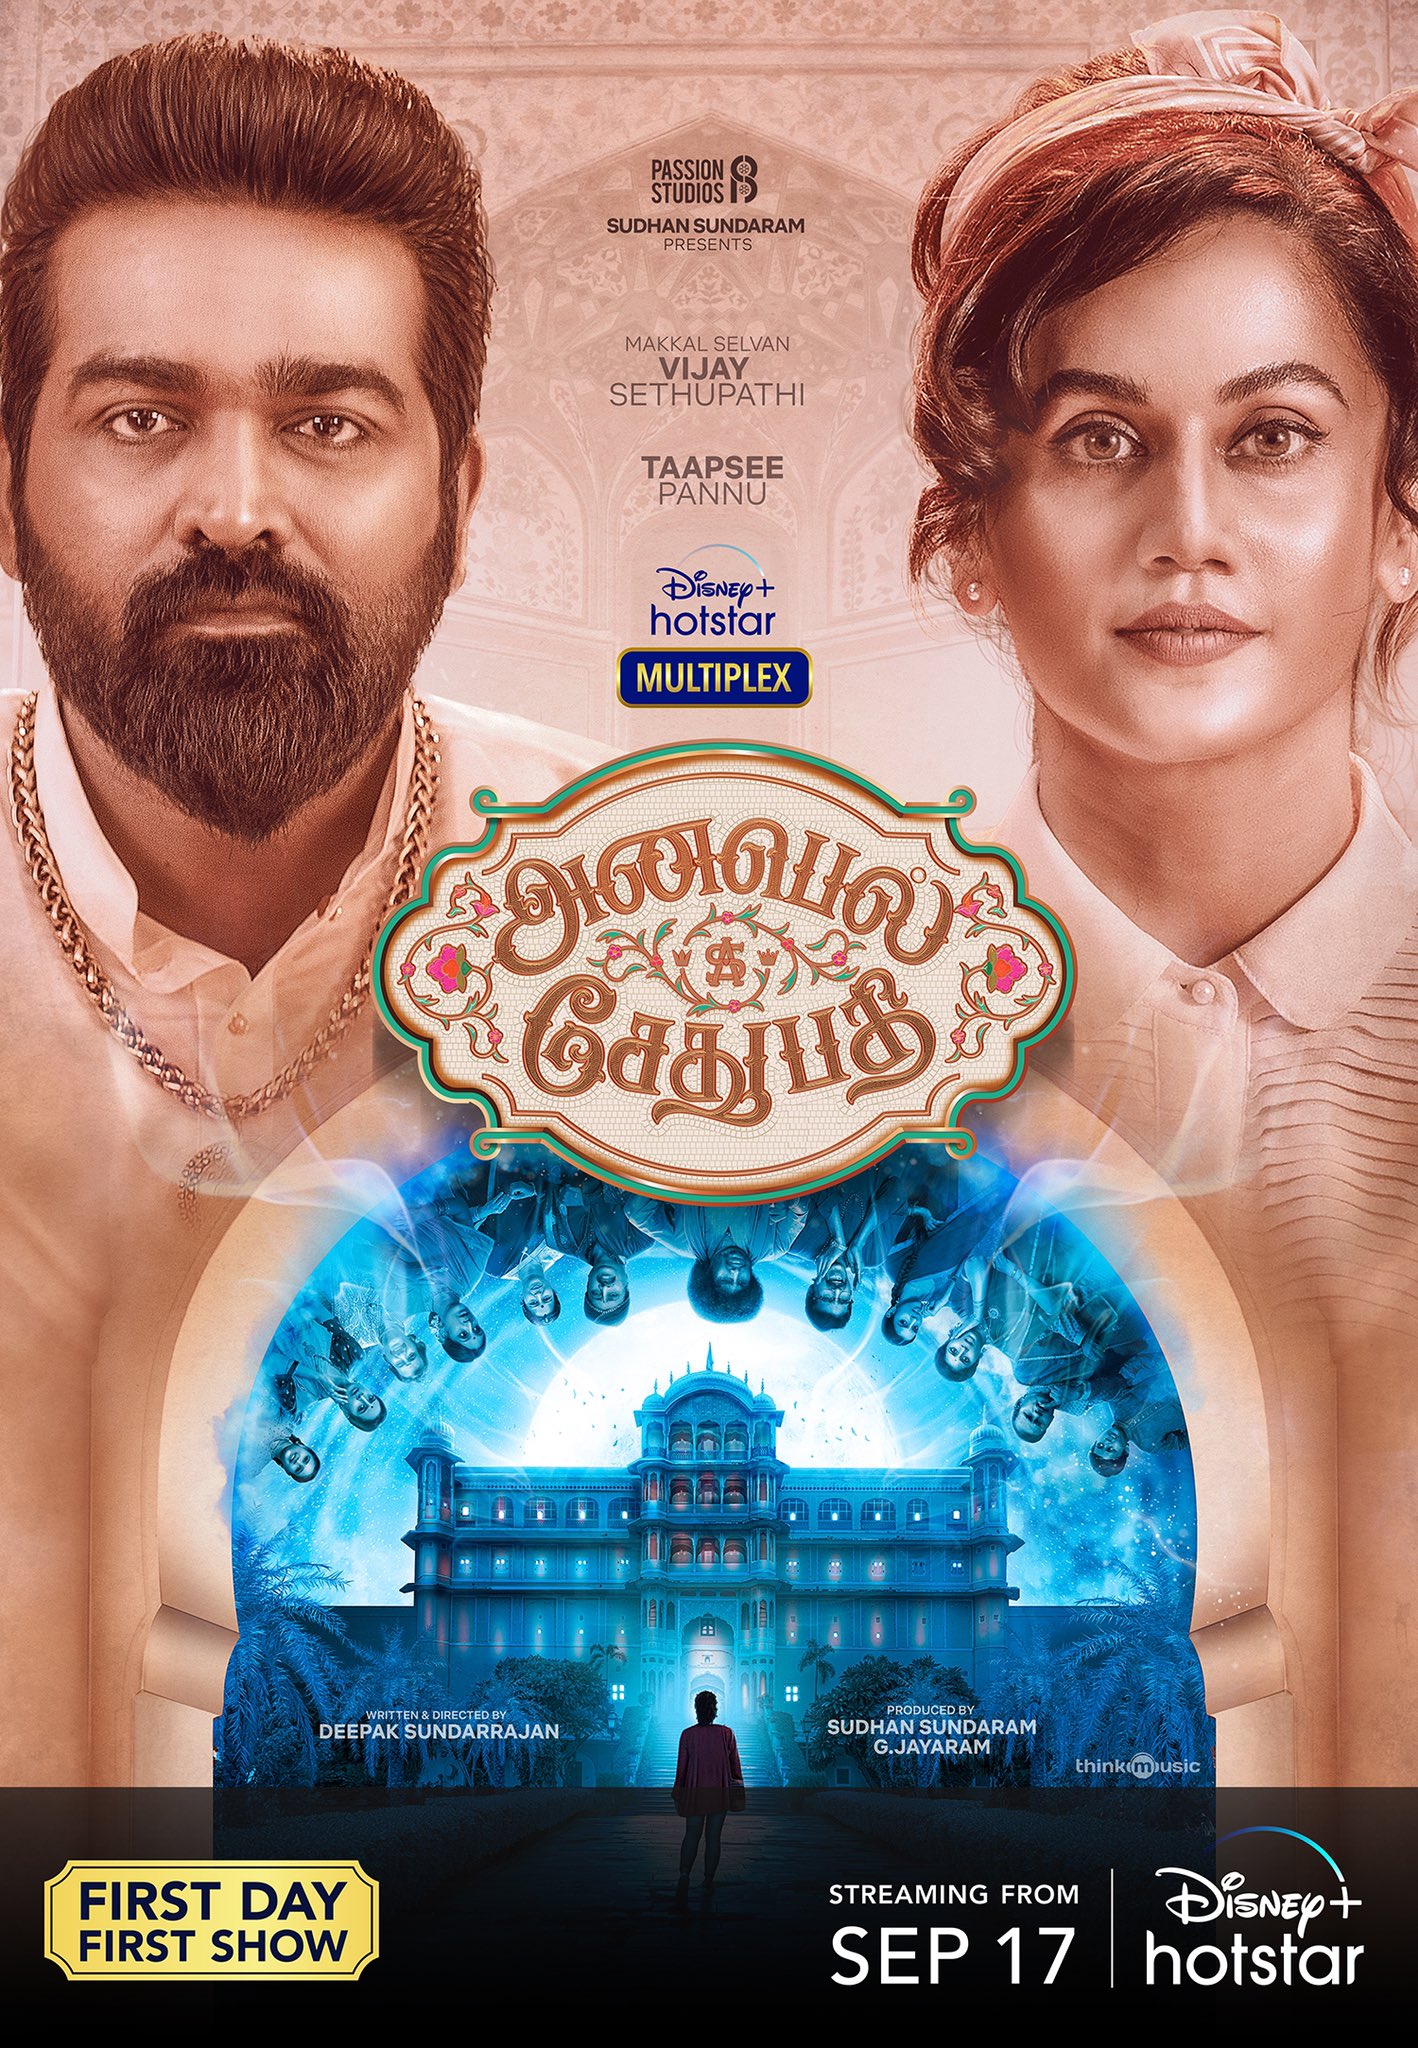 Annabelle Sethupathi Movie Review